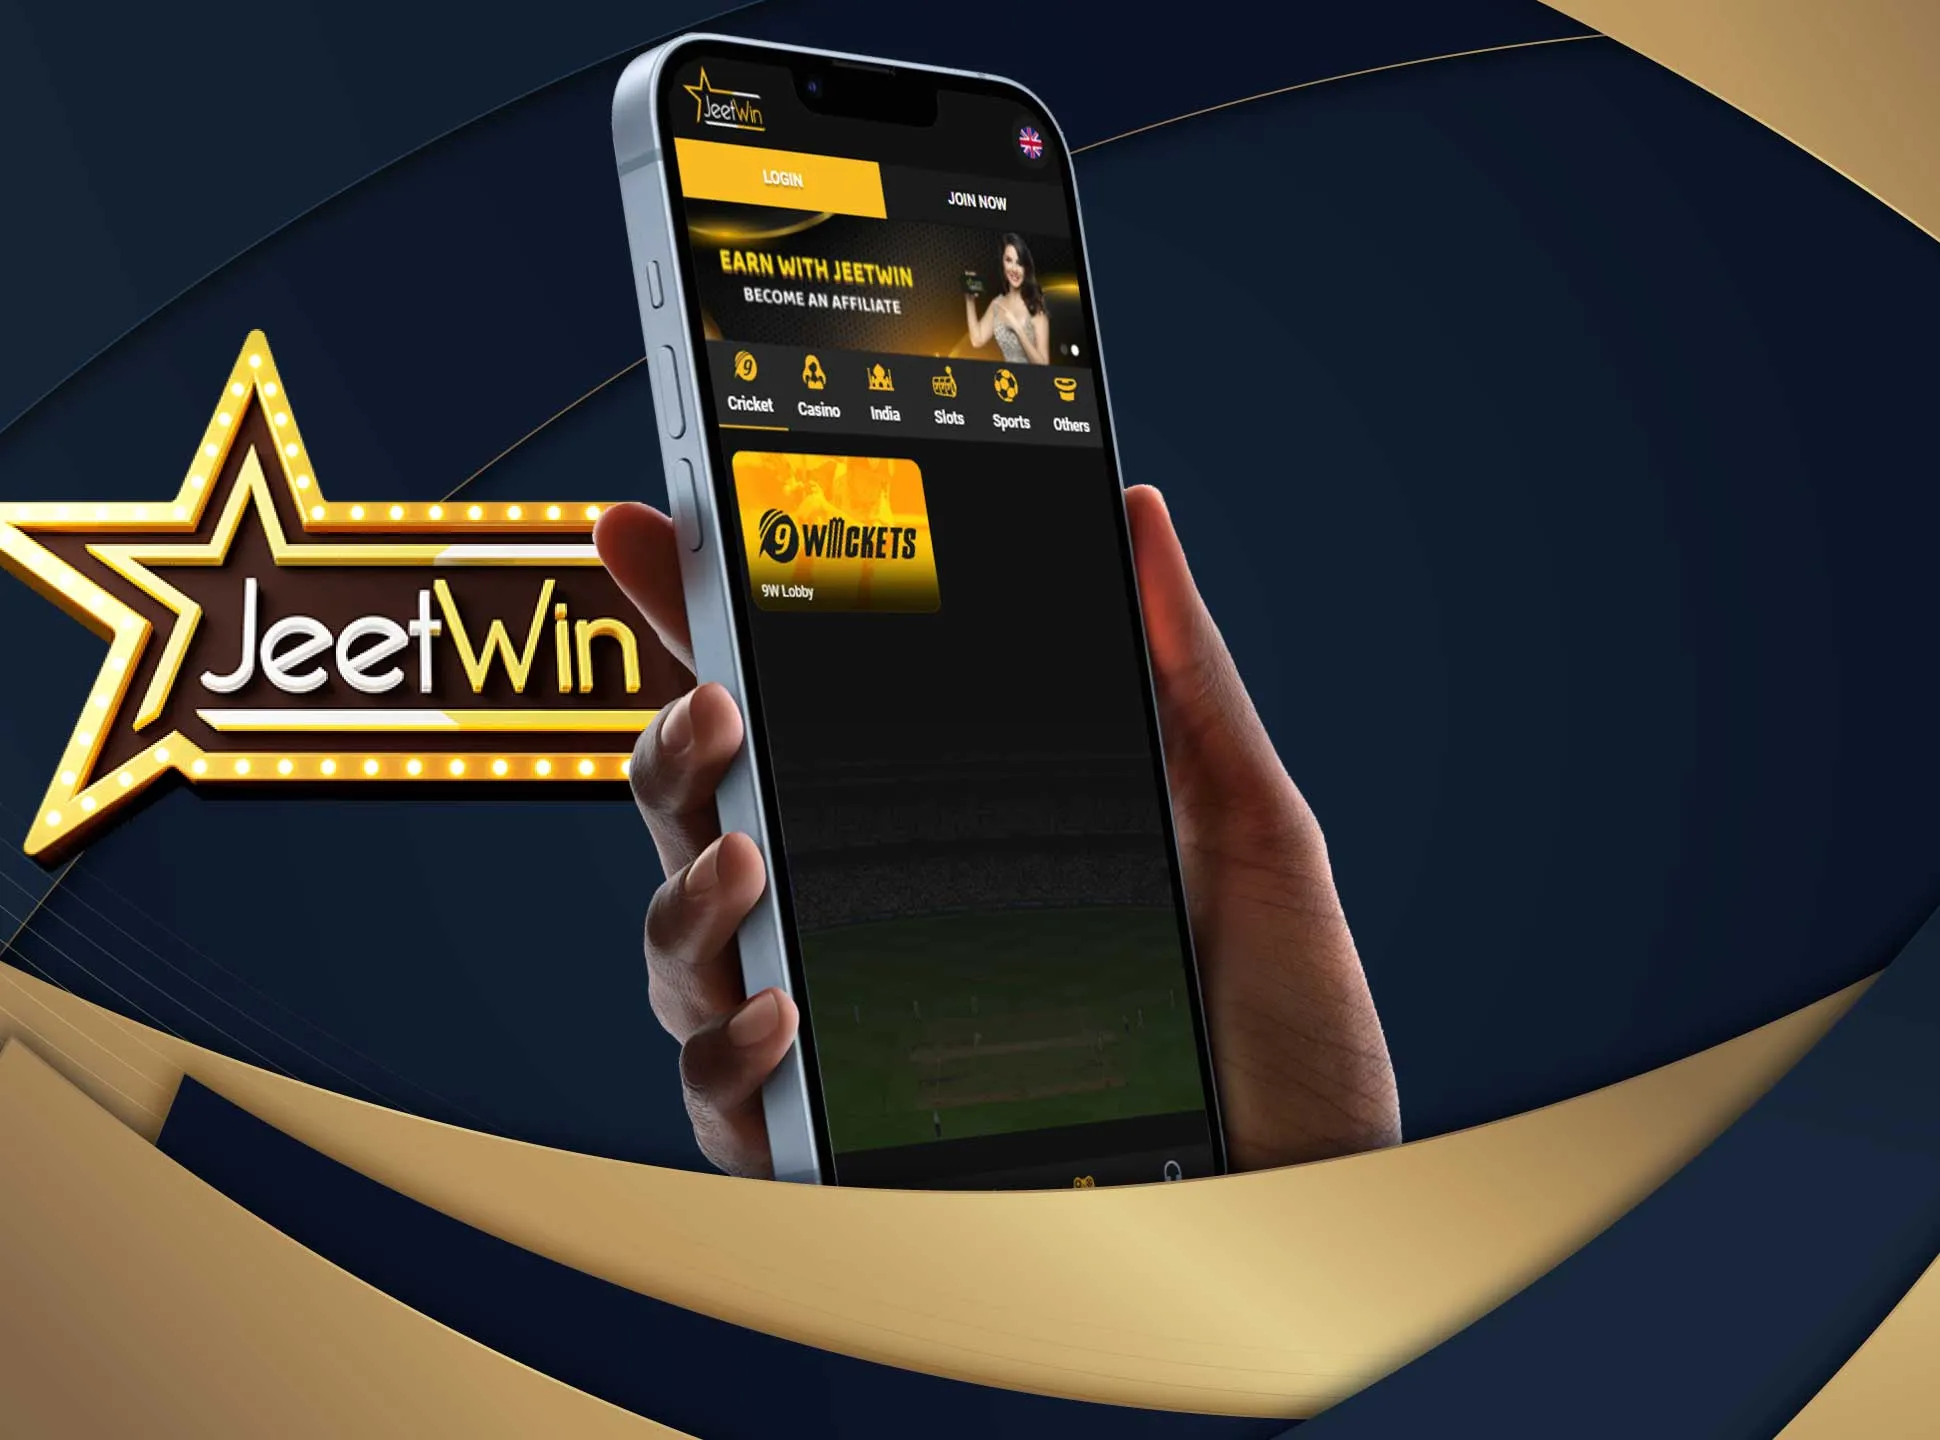 You can place bets on cricket via your Jeetwin app.